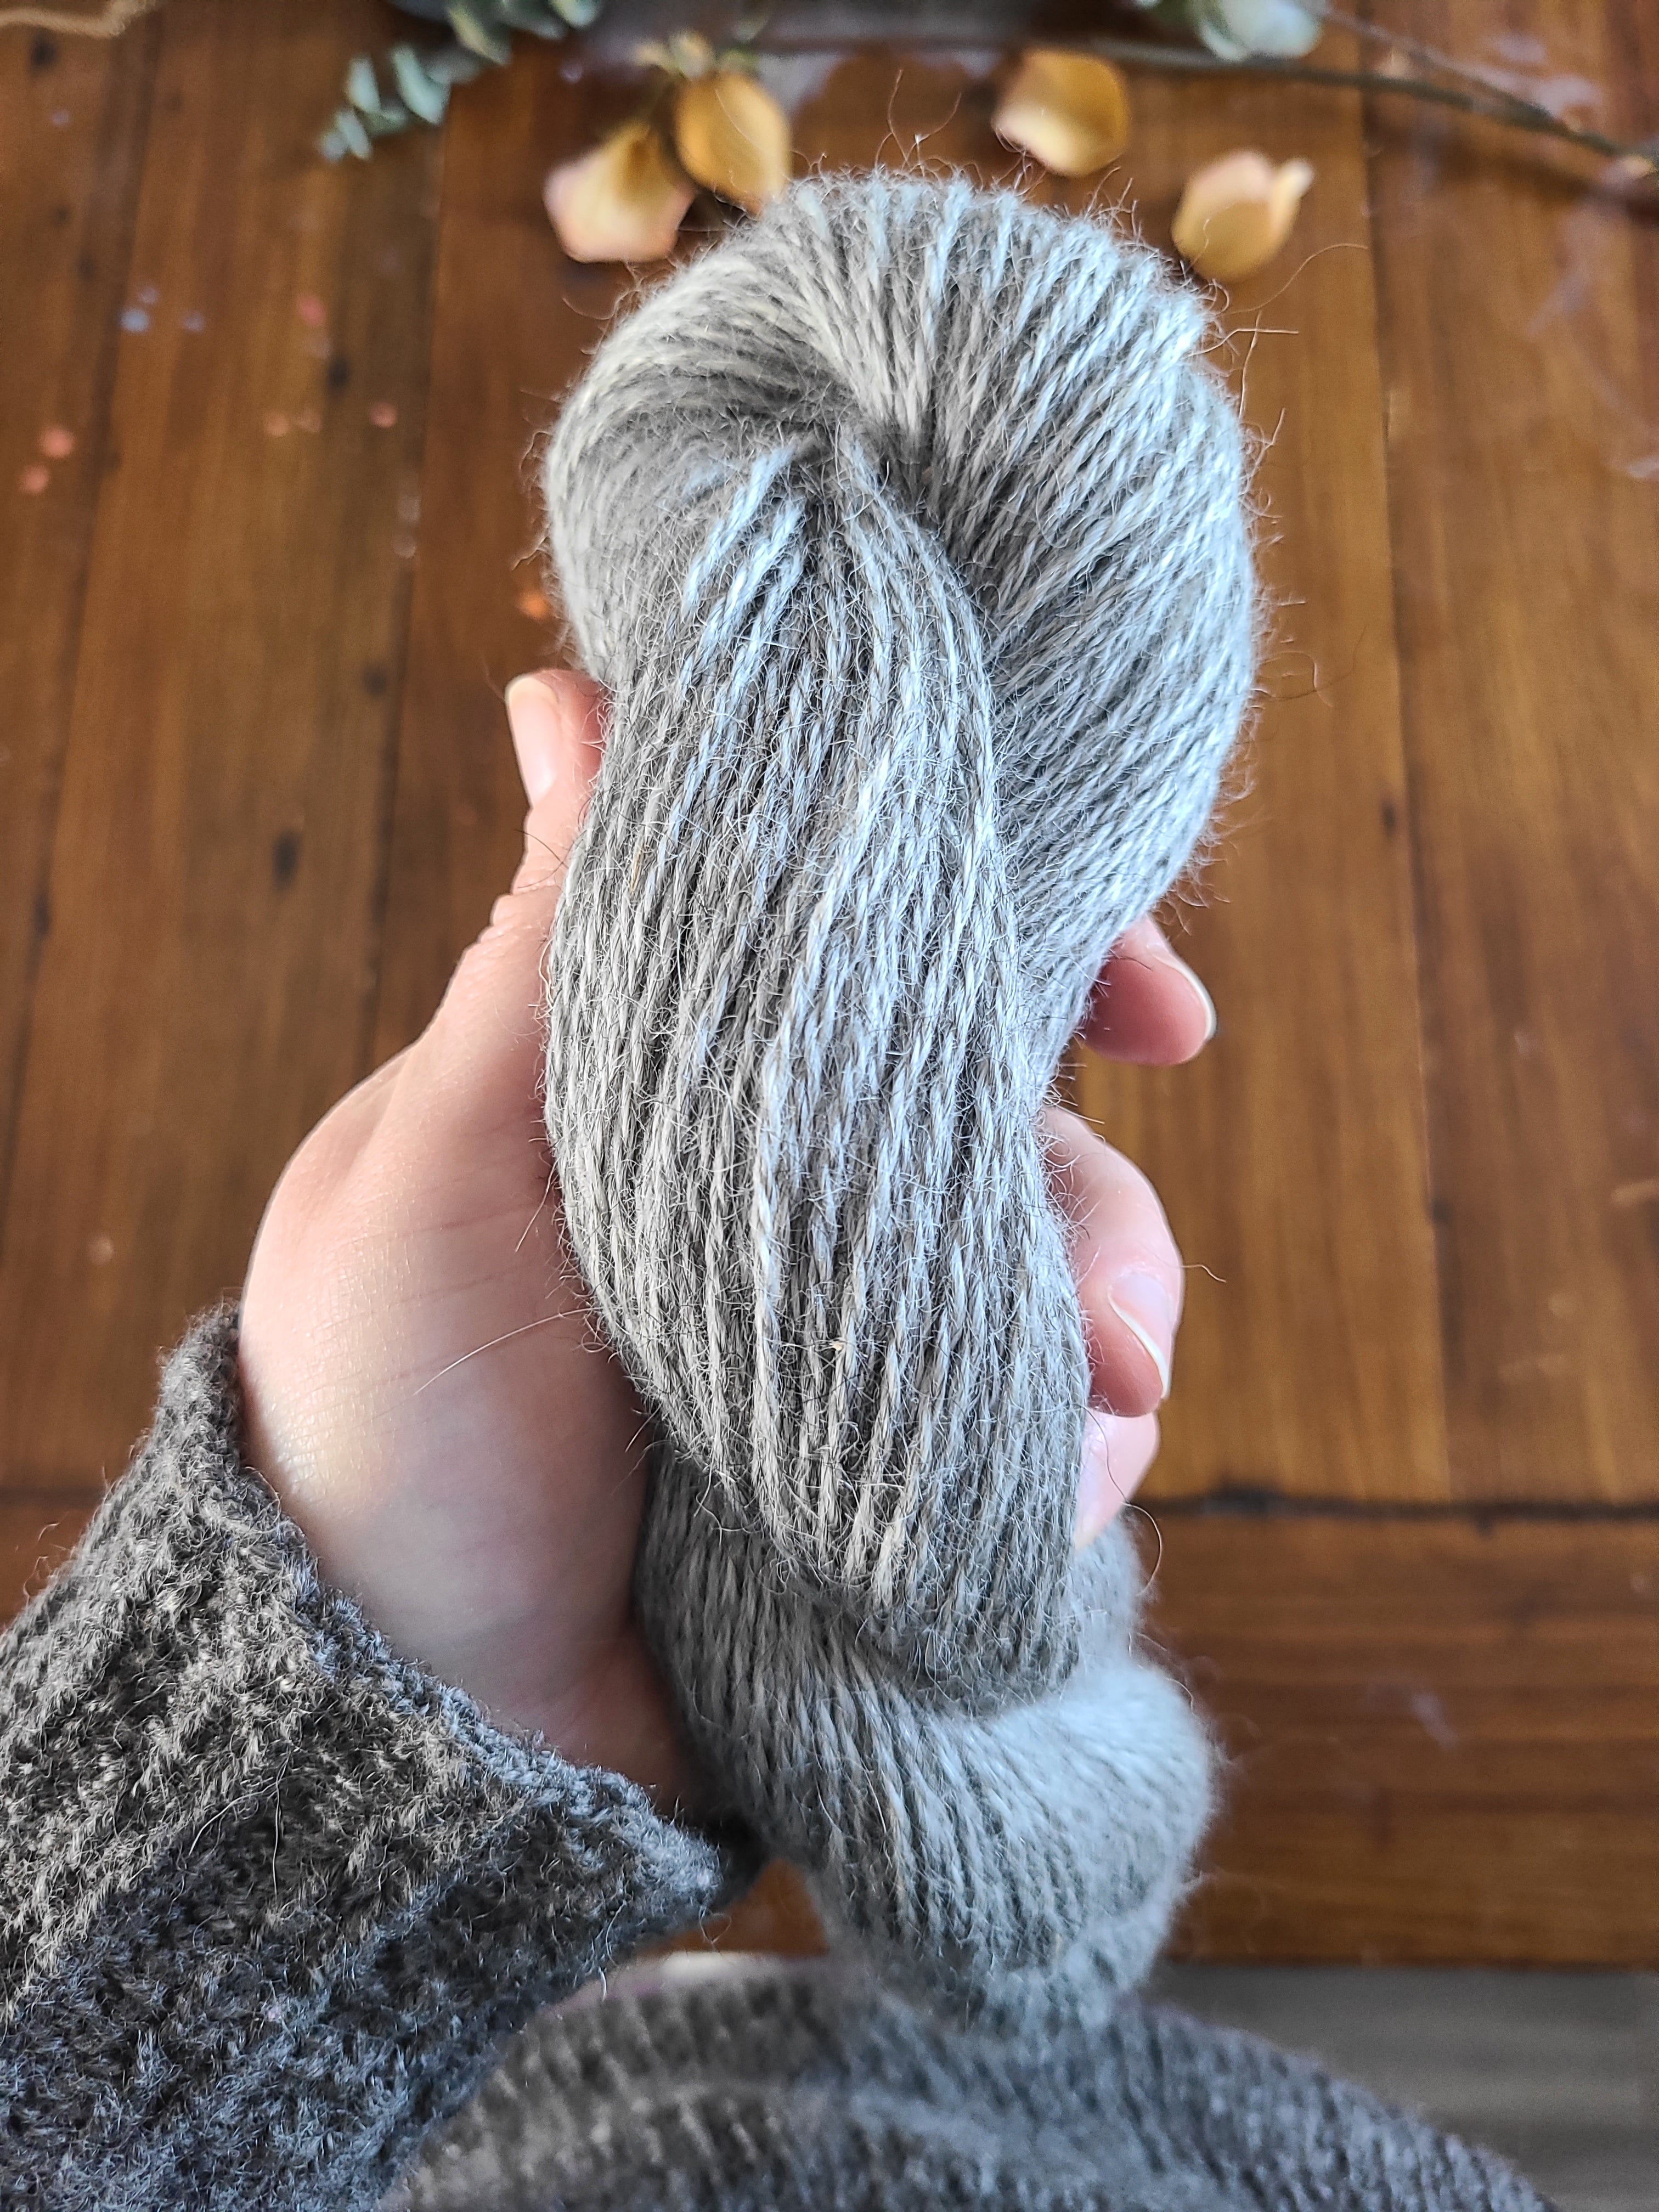 LMW - Jane & Kylo - Light Worsted - 3 ply